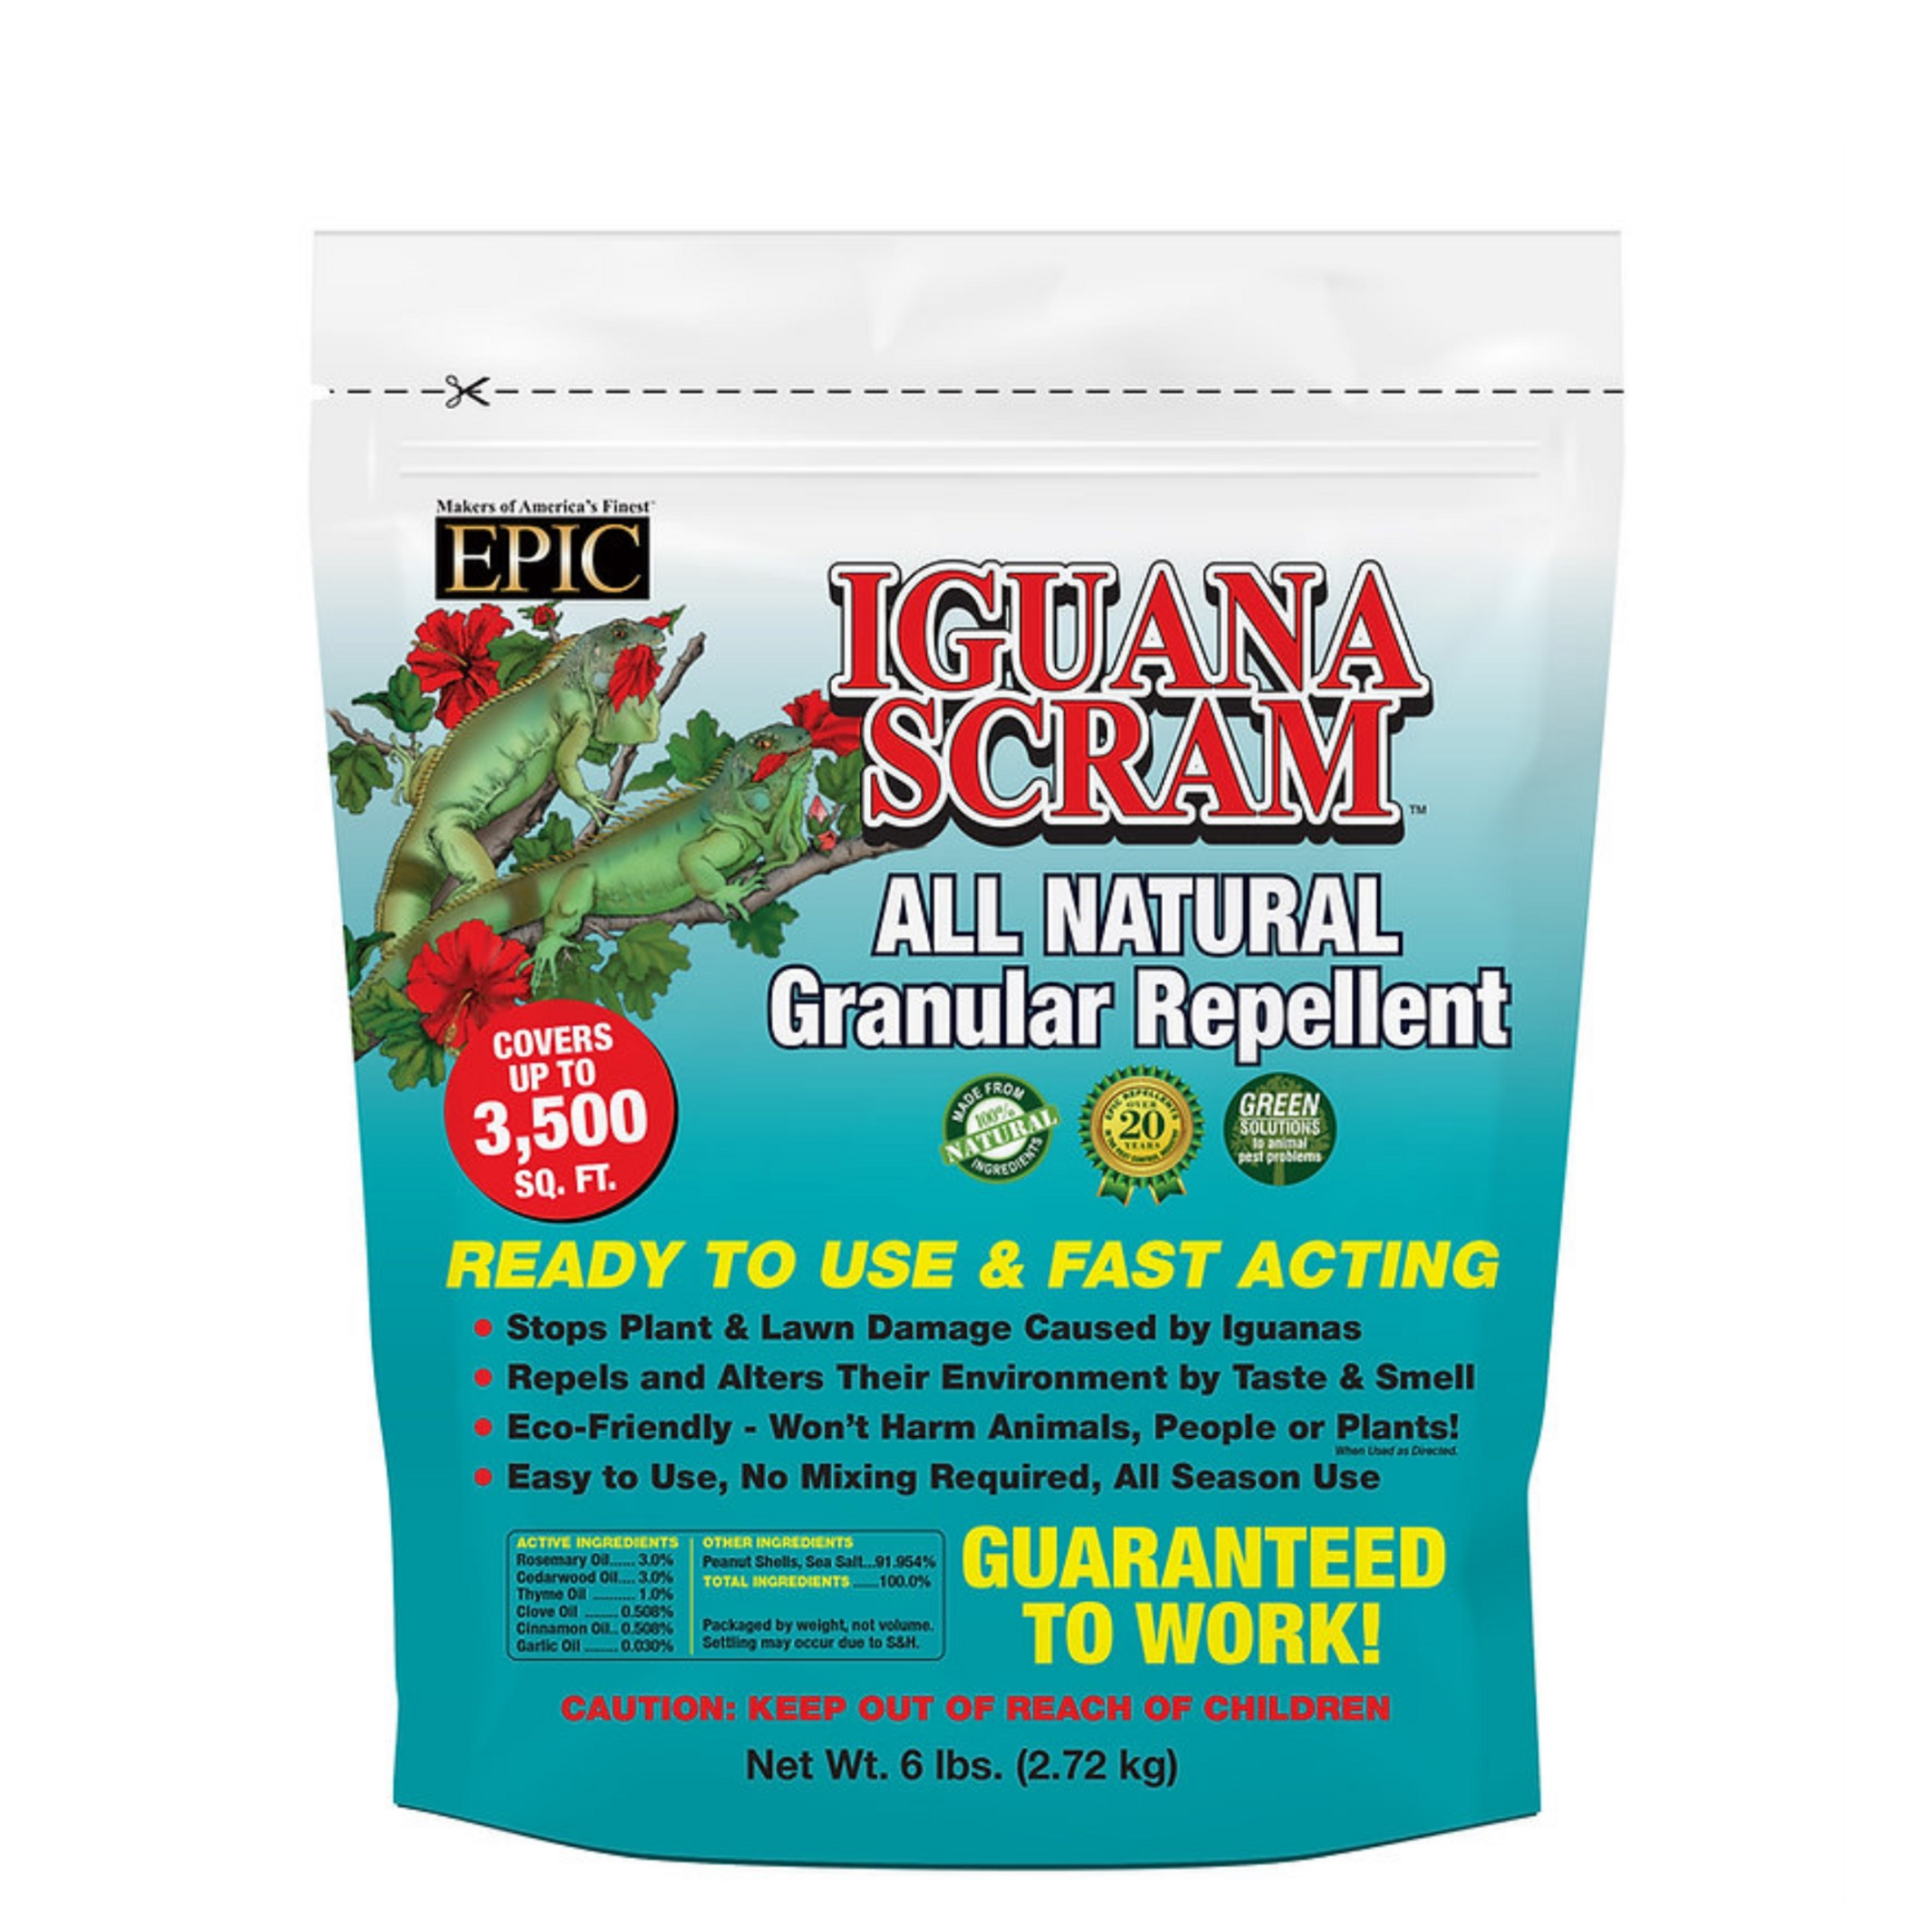 EPIC Iguana Scram All Natural Ready To Use Outdoor Granular Animal Repellent Resealable Bag, 6lbs